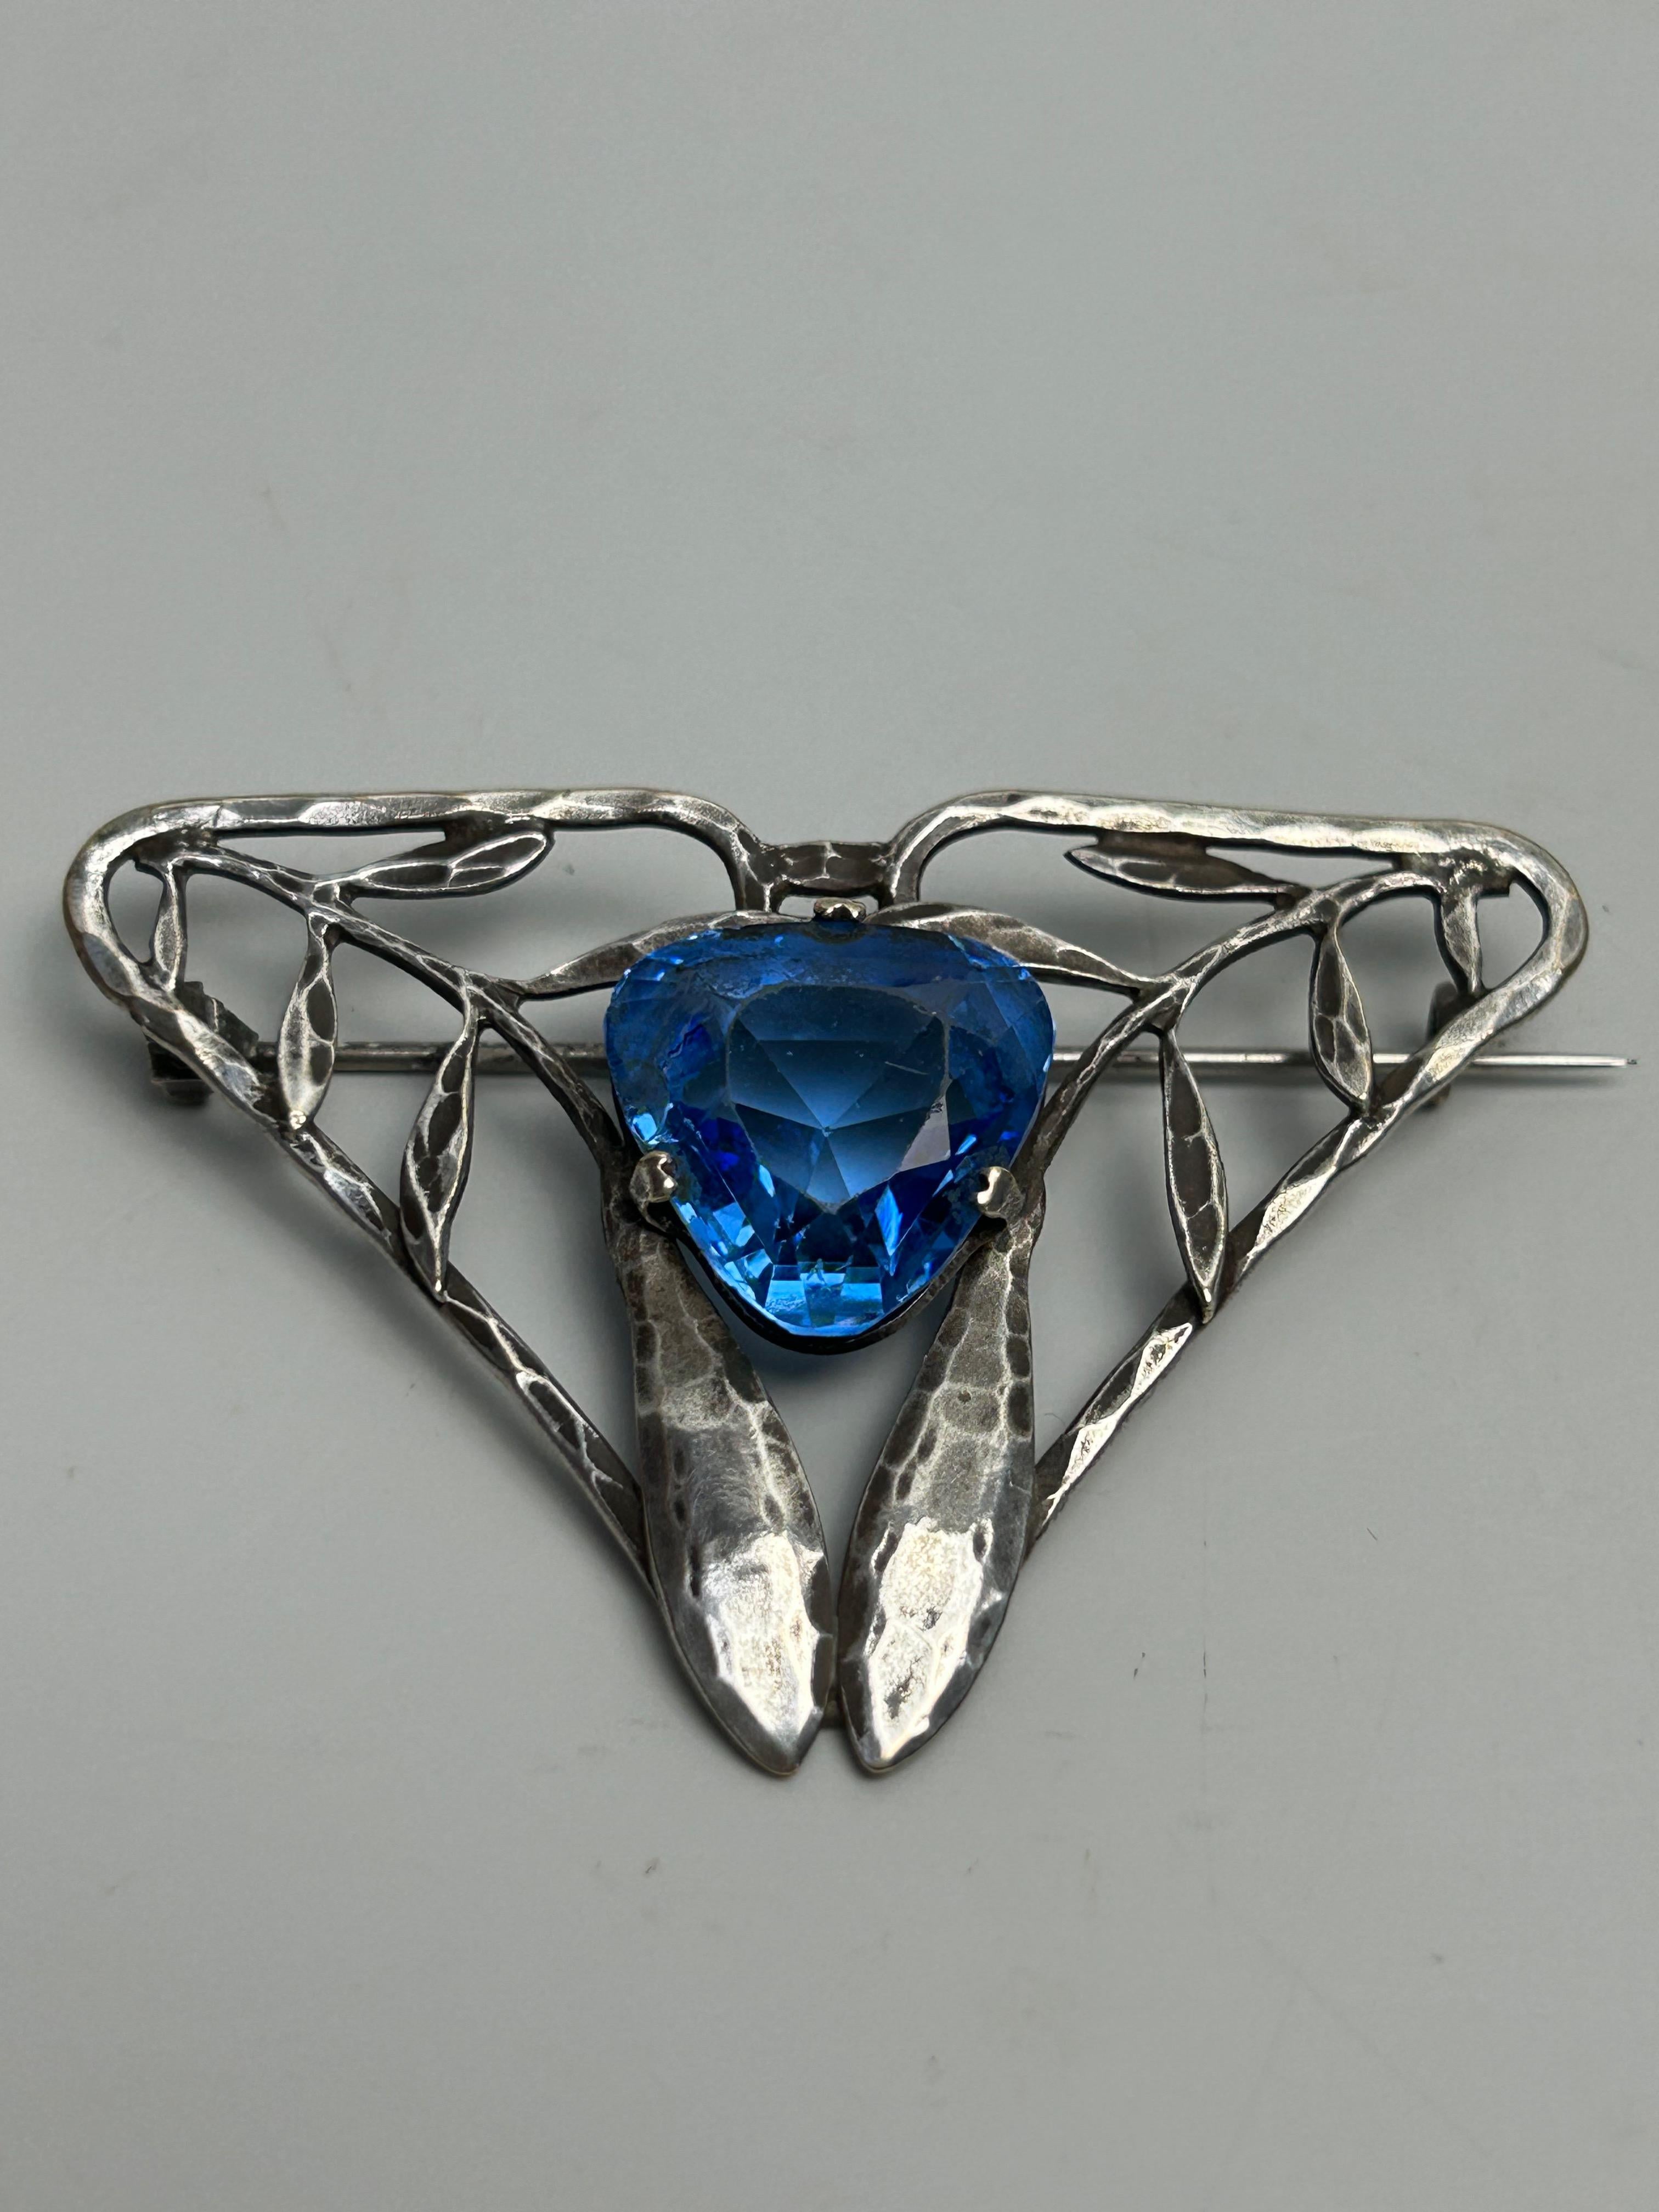 Edgard Brandt, Rare art nouveau brooch.
Blue heart-cut glass set in the middle.
Foliage finely hammered with the mastery of Brandt's work on wrought iron.
Signed Edgard Brandt.
Note a chip on the stone.
Width: 6.2 cm
Height: 4.1 cm
Thickness: 0.7